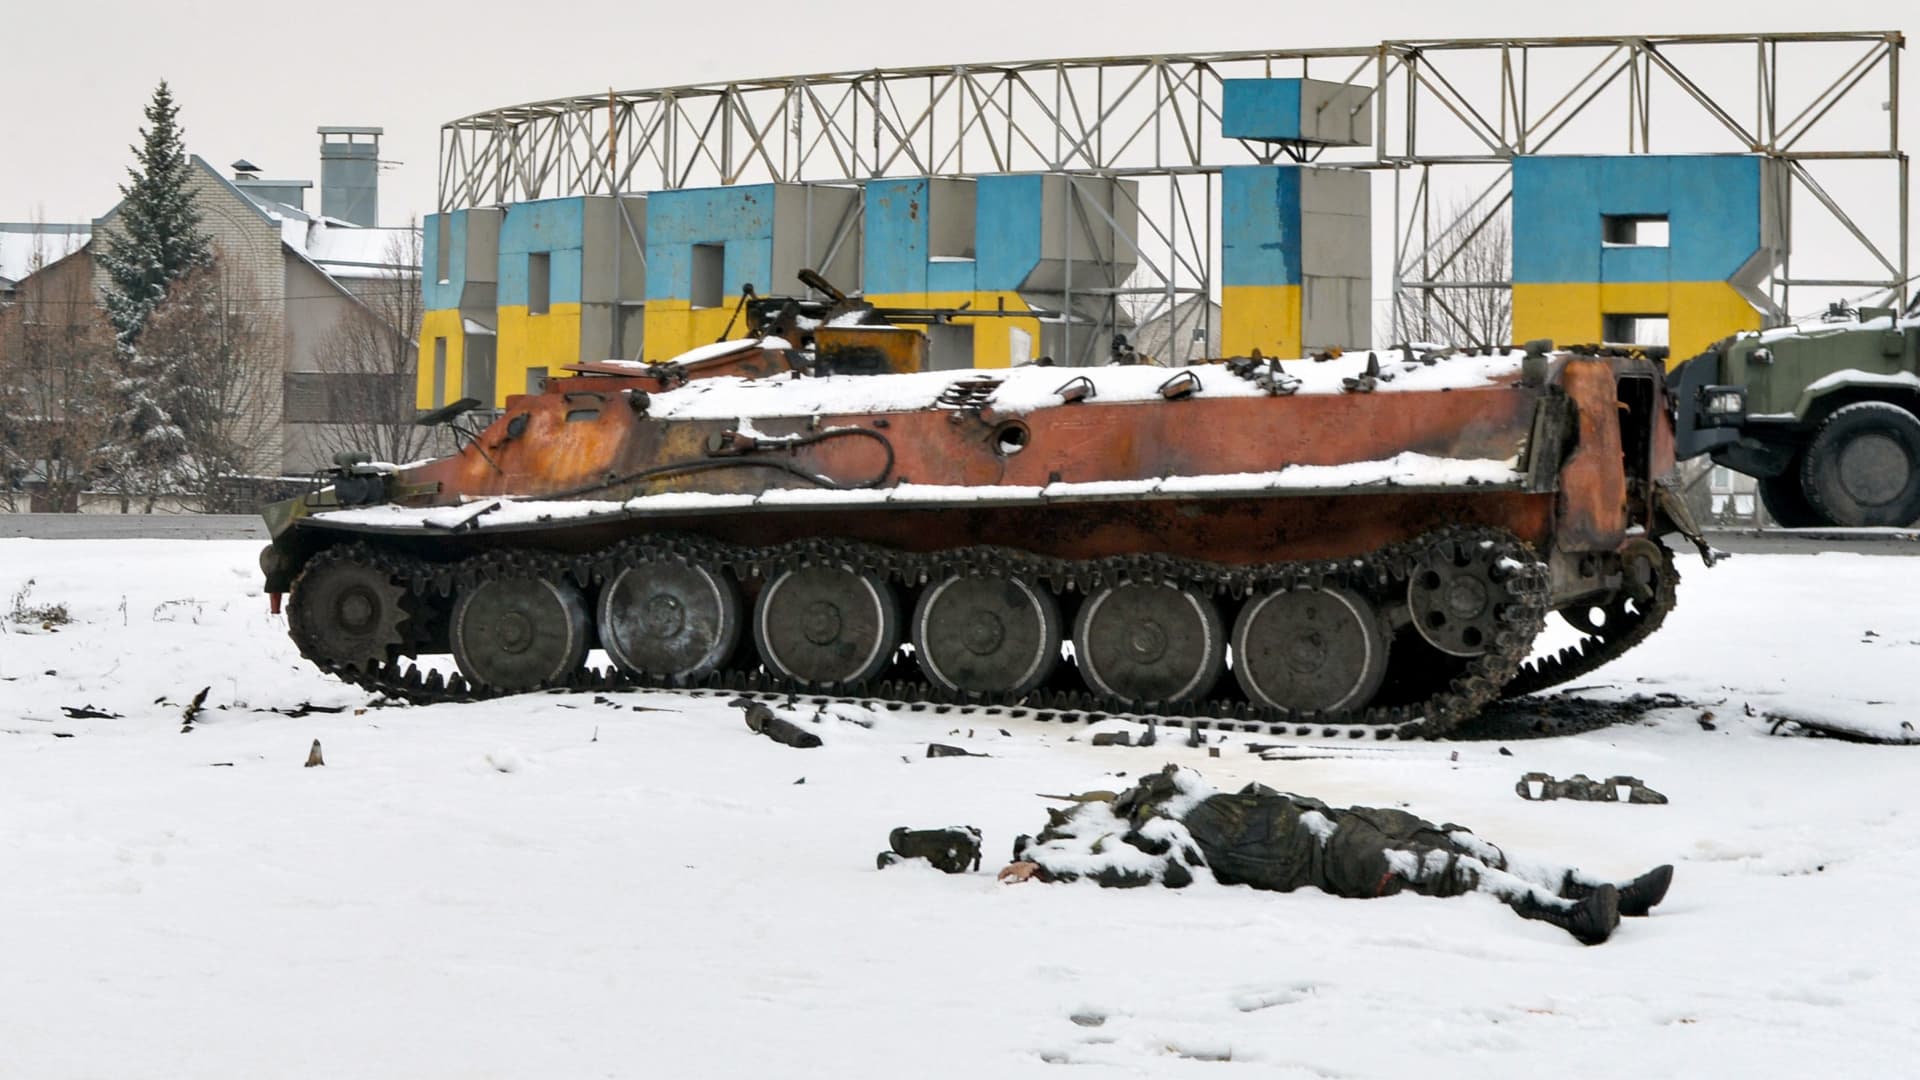 The body of a Russian serviceman lies near destroyed Russian military vehicles on the roadside on the outskirts of Kharkiv on February 26, 2022, following the Russian invasion of Ukraine.